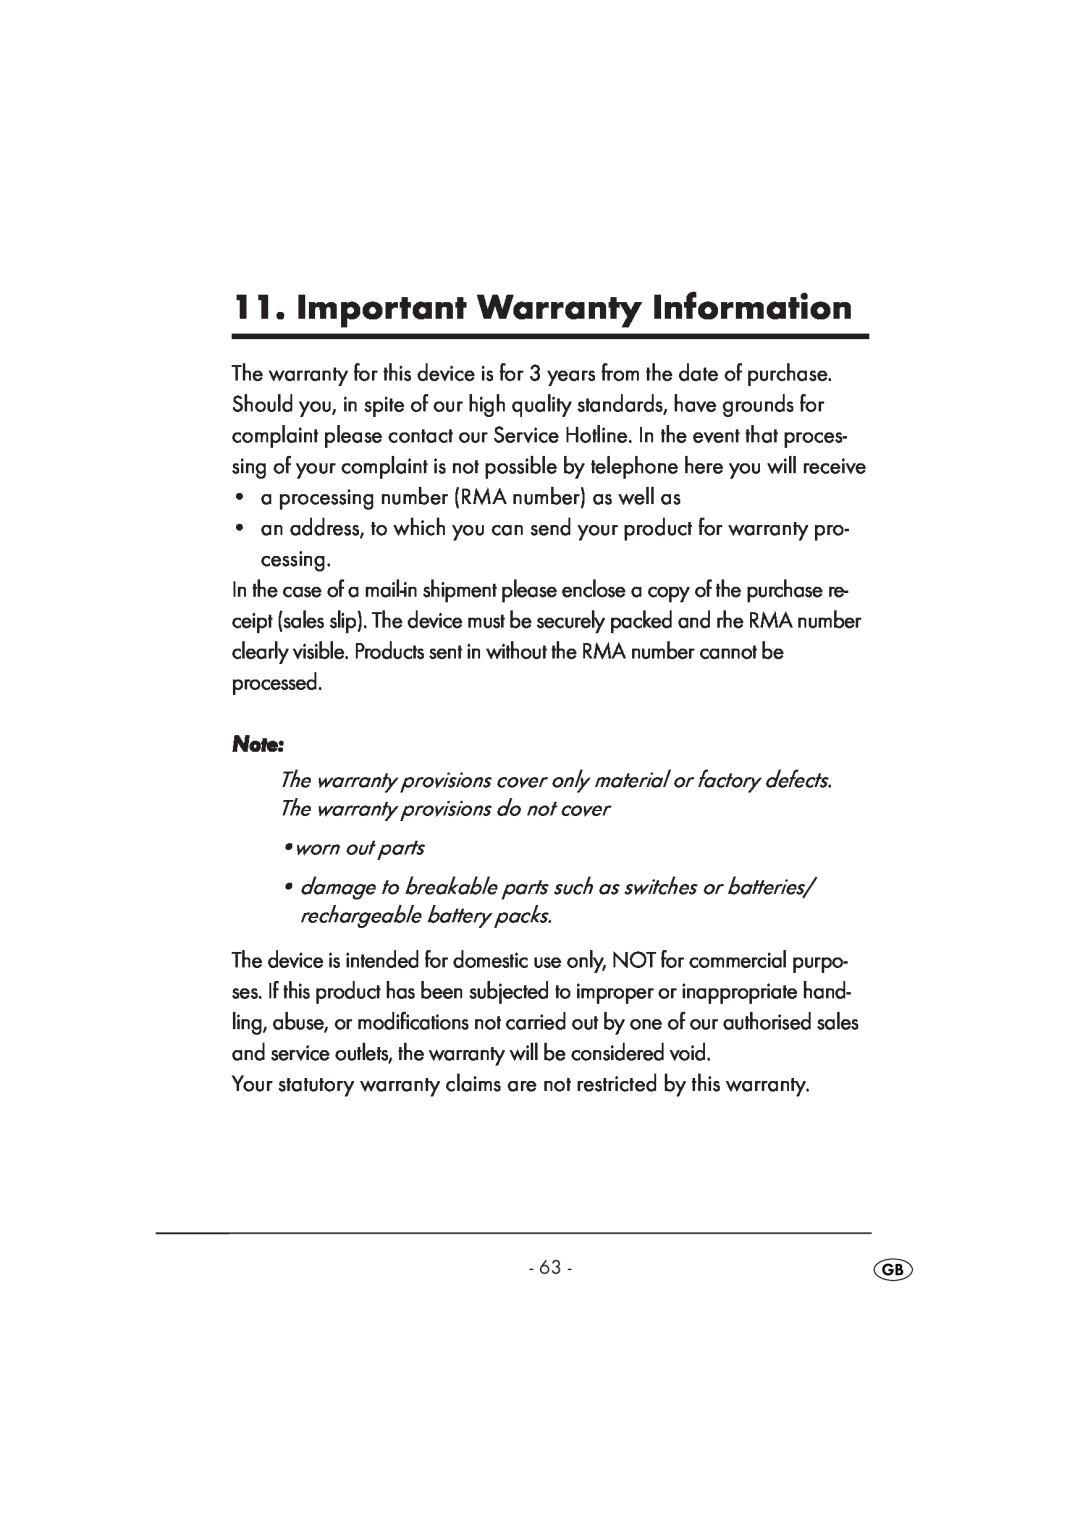 Kompernass KH 2356 manual Important Warranty Information, a processing number RMA number as well as 